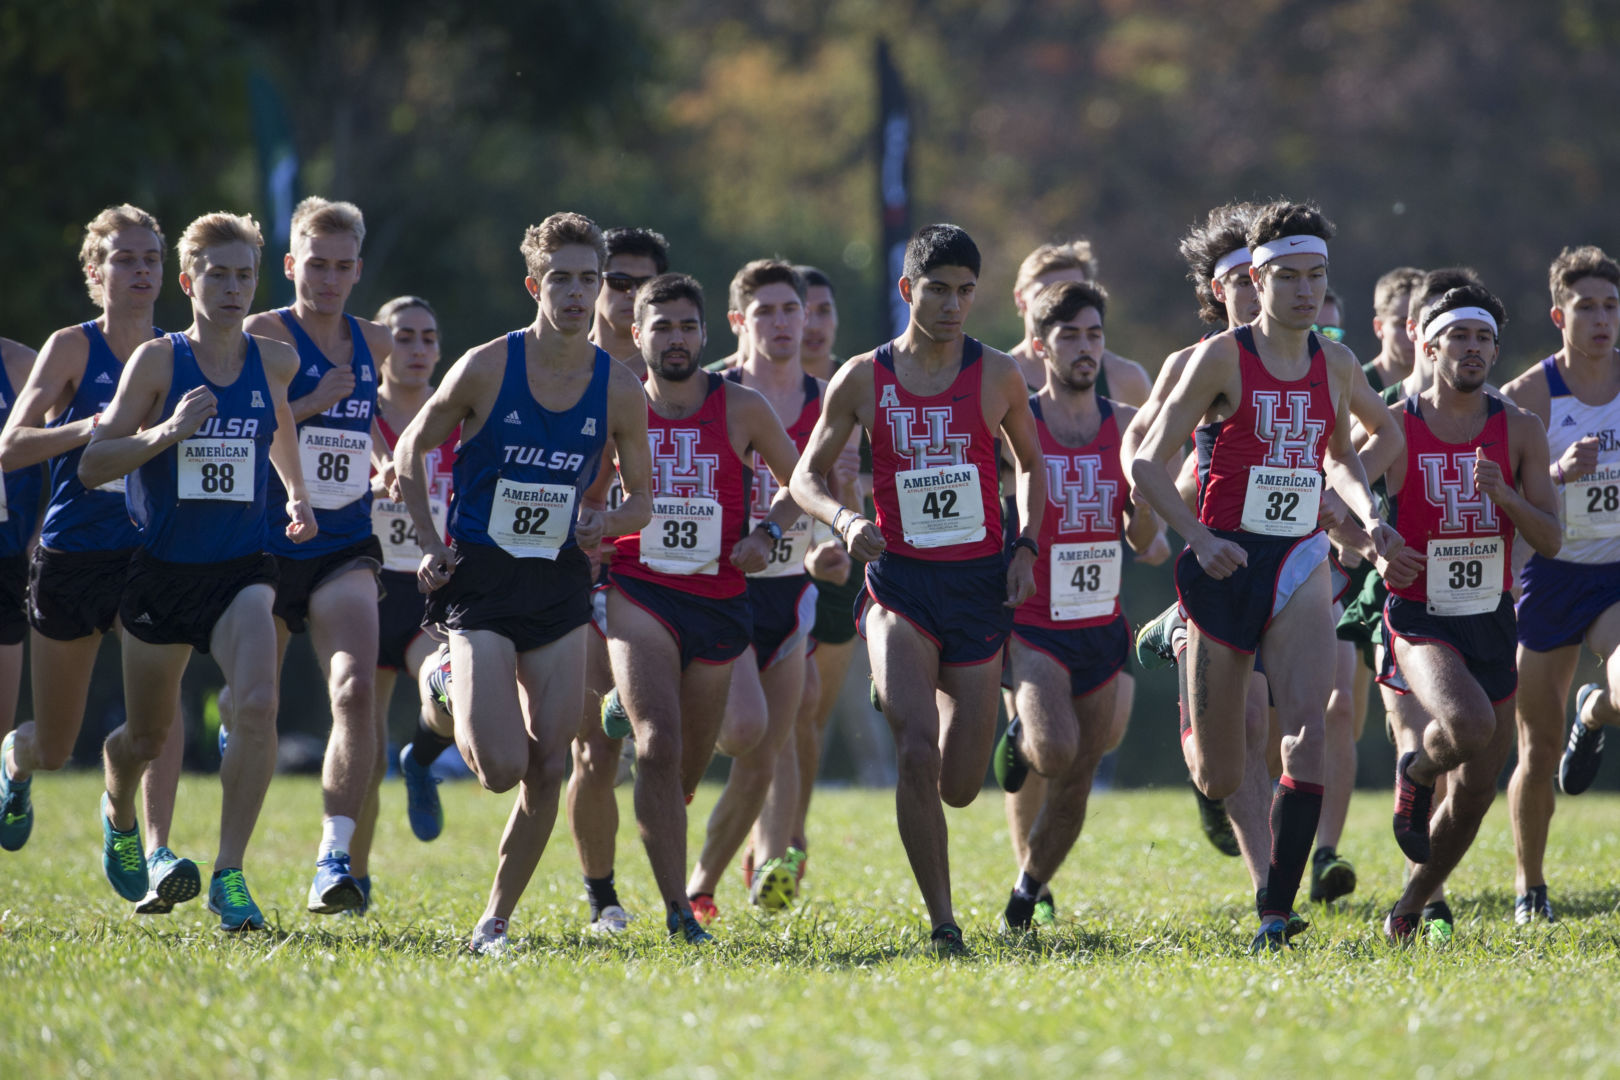 Houston's cross country teams concluded their season at the NCAA South Central Regional Championships on Friday. The men's team placed 11th overall and the women placed eighth overall. | File photo